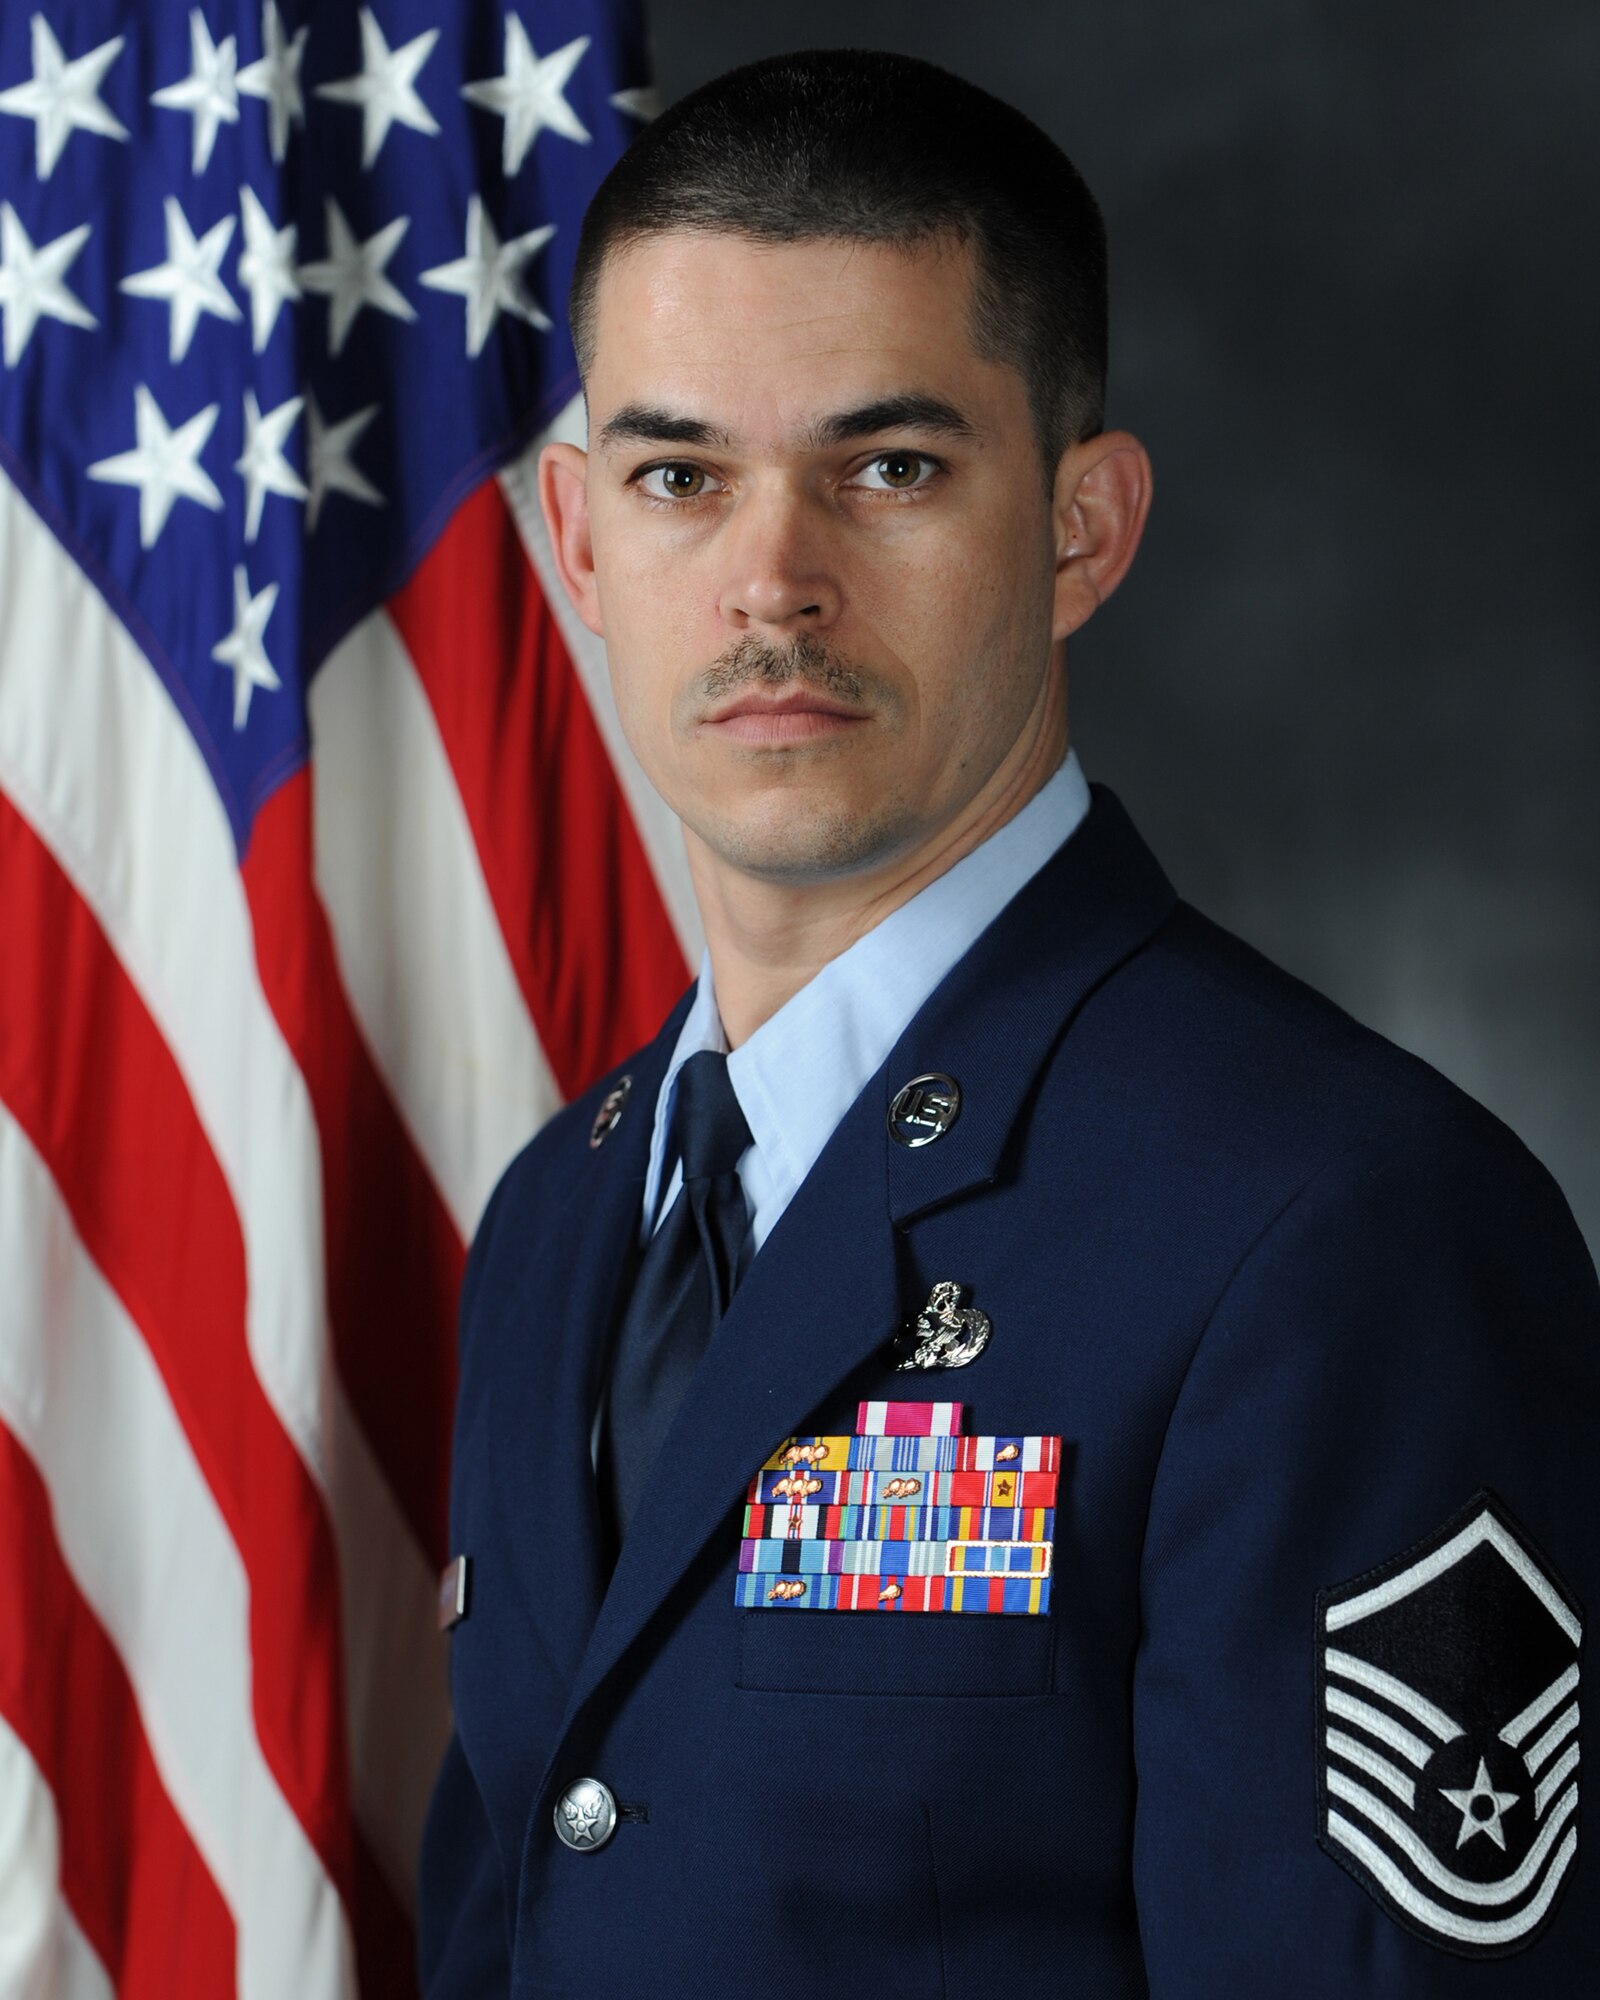 OFFUTT AIR FORCE BASE, Neb. -- Master Sgt. William E. Villareal, from Mountain Home AFB, Idaho., is one of 29 Airmen nominated for awards who will attend the 2010 Air Combat Command Outstanding Airmen of the Year Awards Banquet in Omaha, Neb., April 21. Sergeant Villareal is nominated for the SNCO of the Year Award. U.S. Air Force courtesy photo